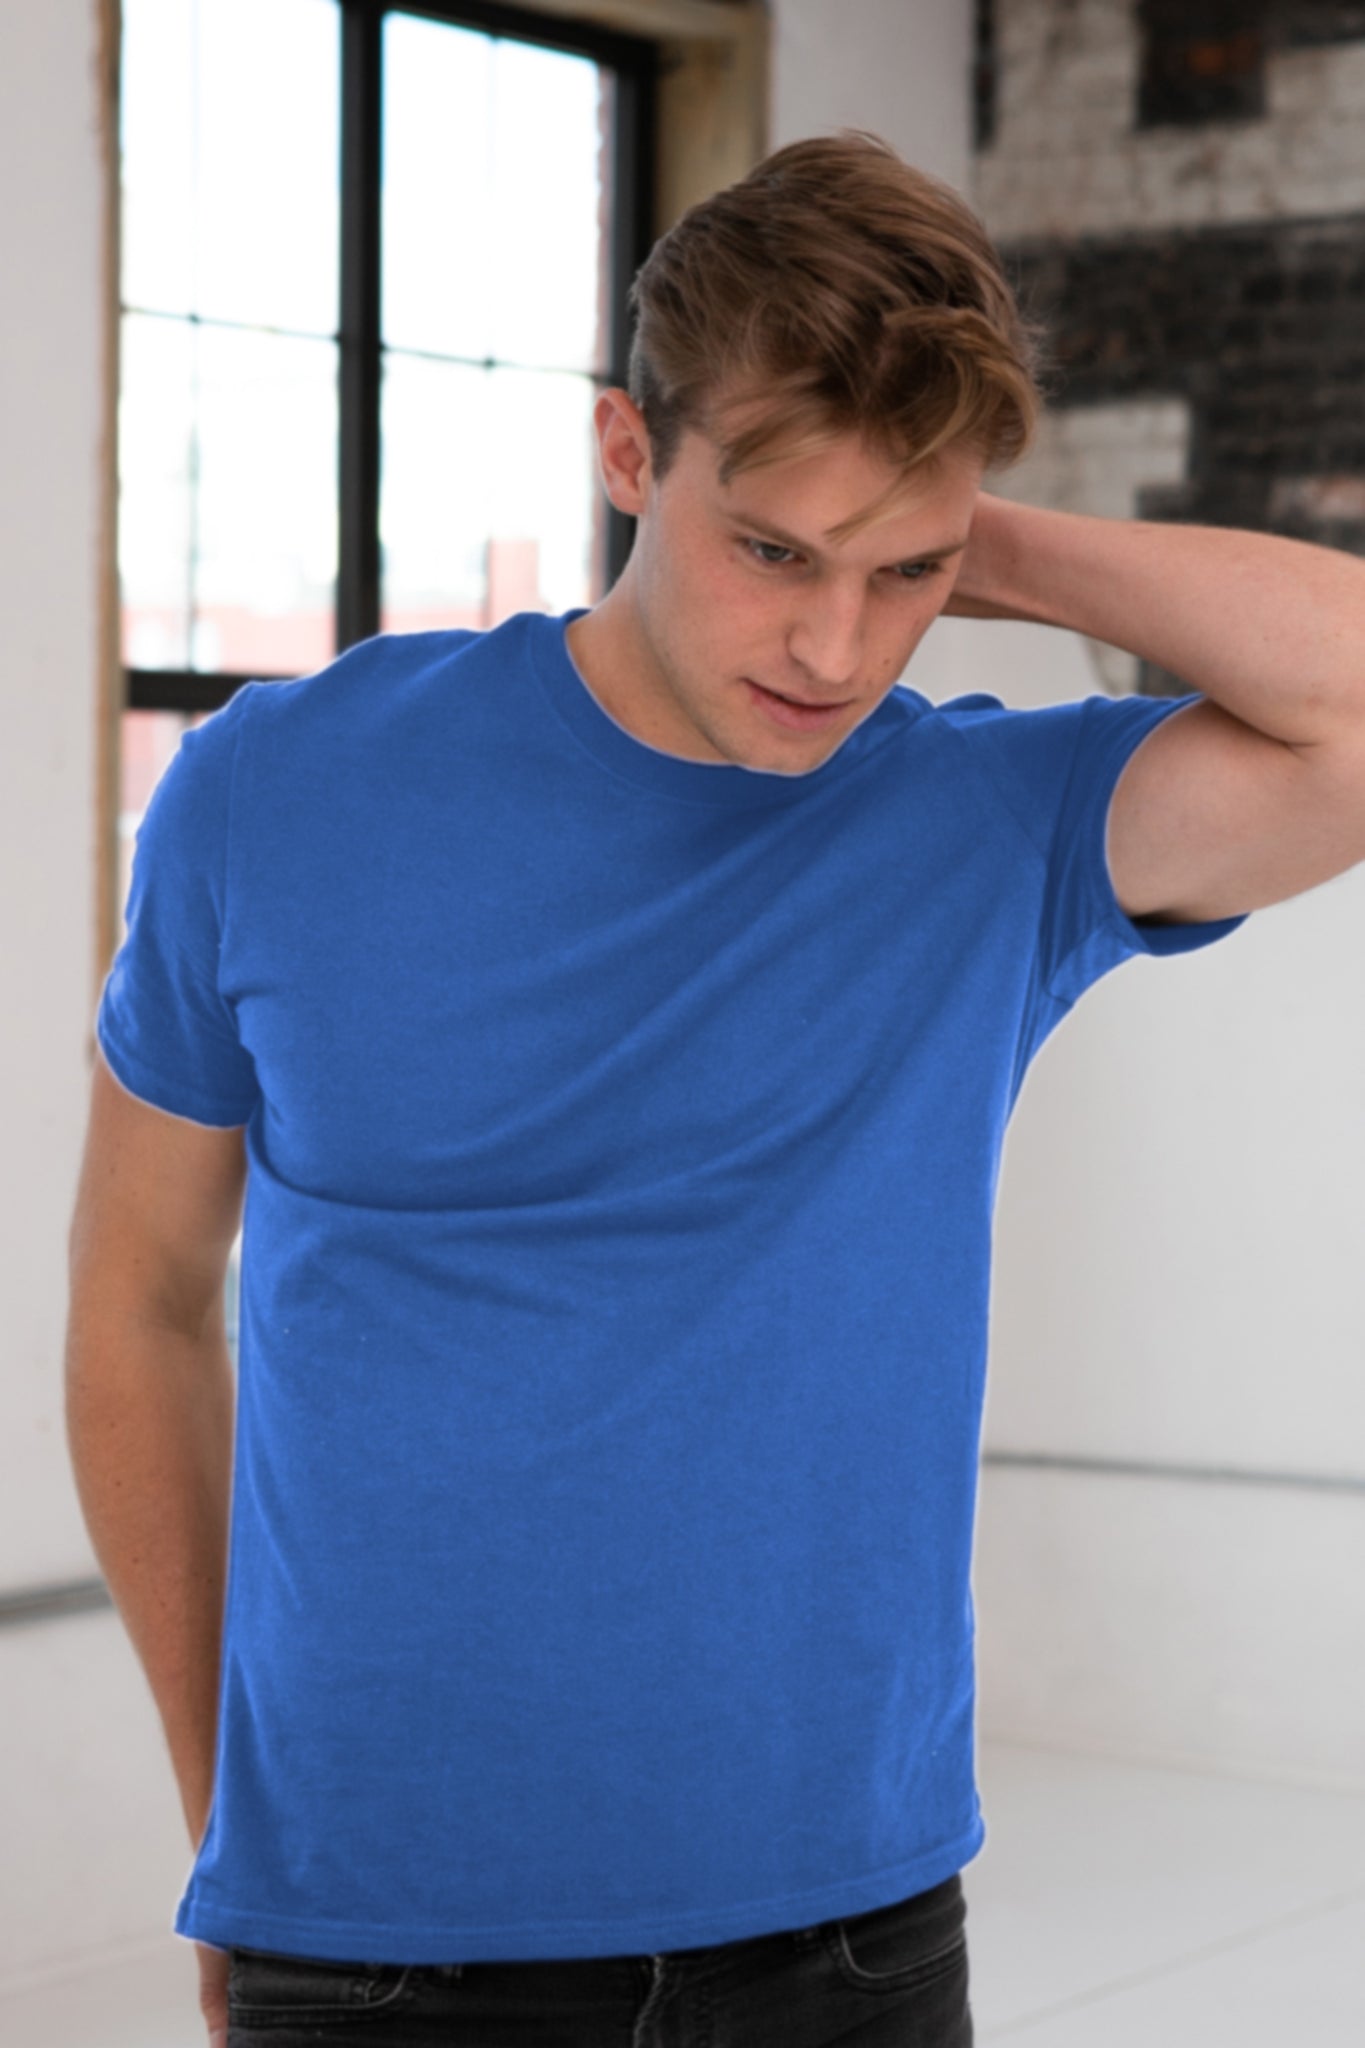 Male Model wearing GOEX Unisex and Men's Premium Cotton Tee in Royal